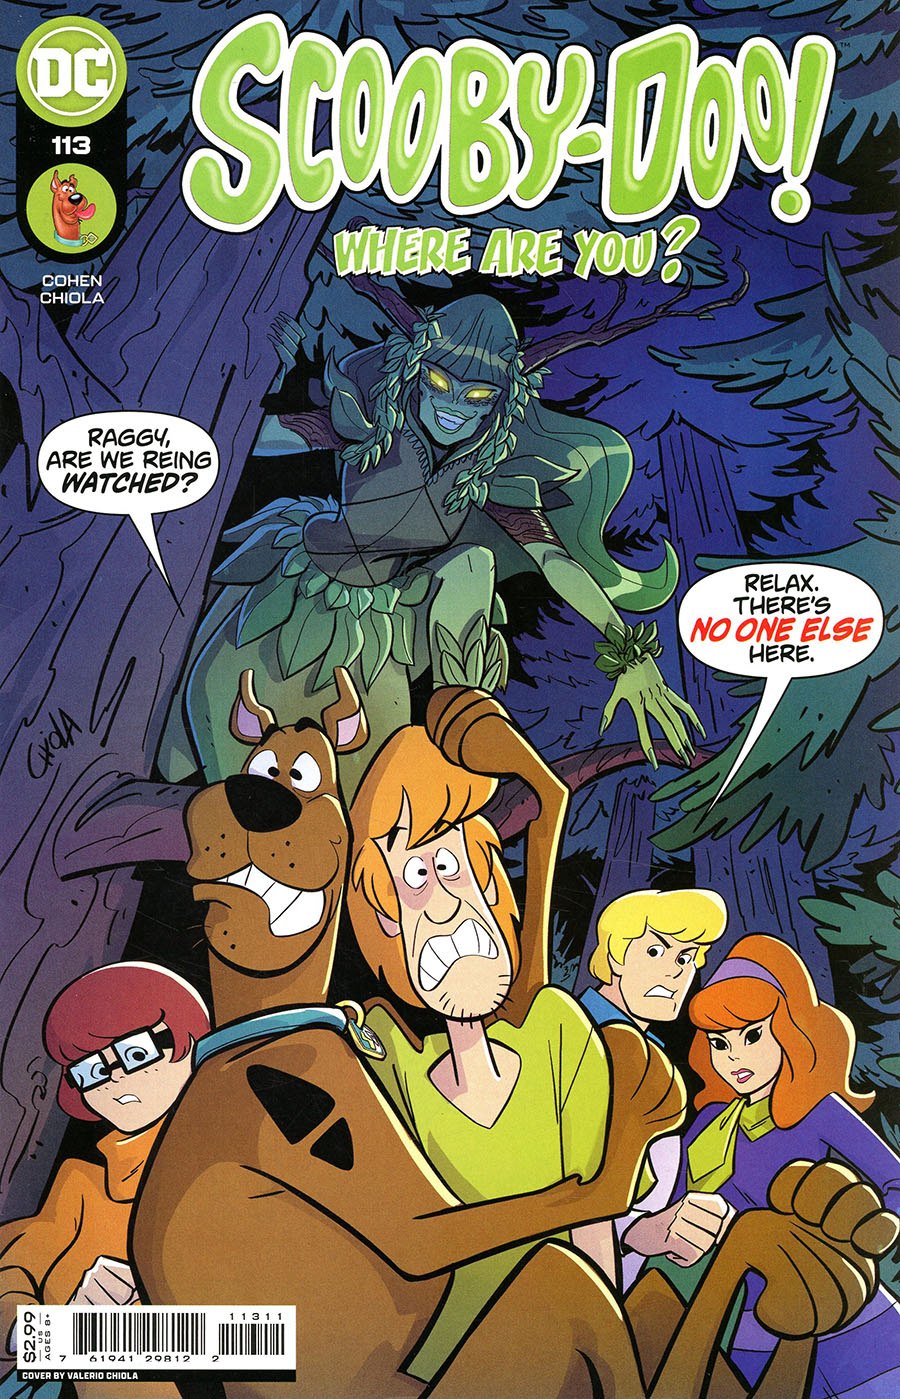 Scooby-Doo Where Are You #113